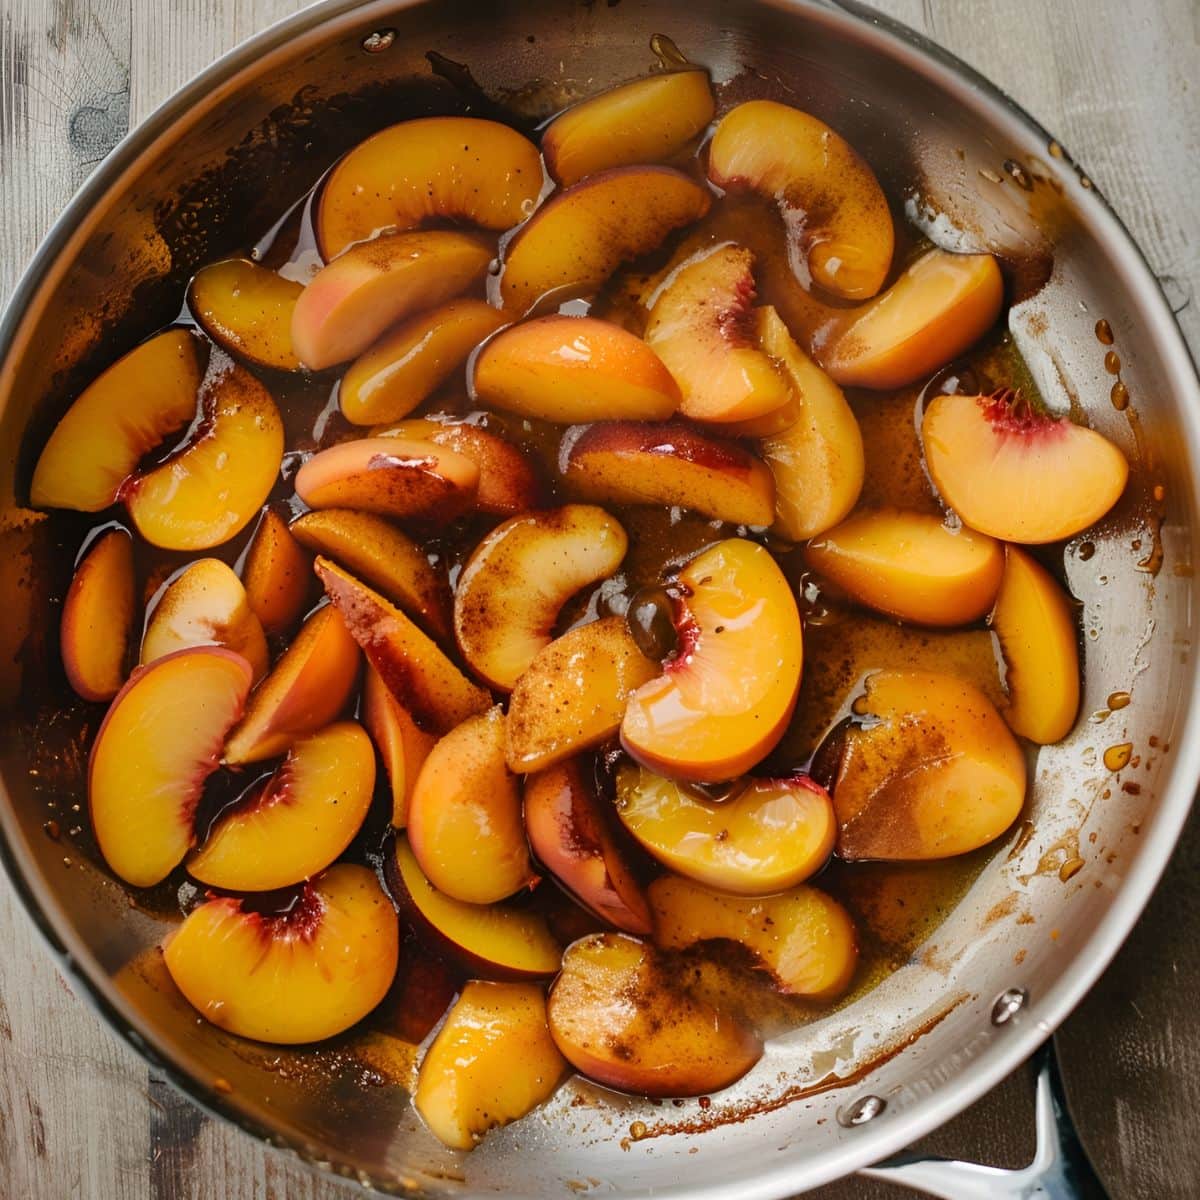 Top View of Fresh Peaches Cooking in a Frying Pan Agave Syrup and Spices